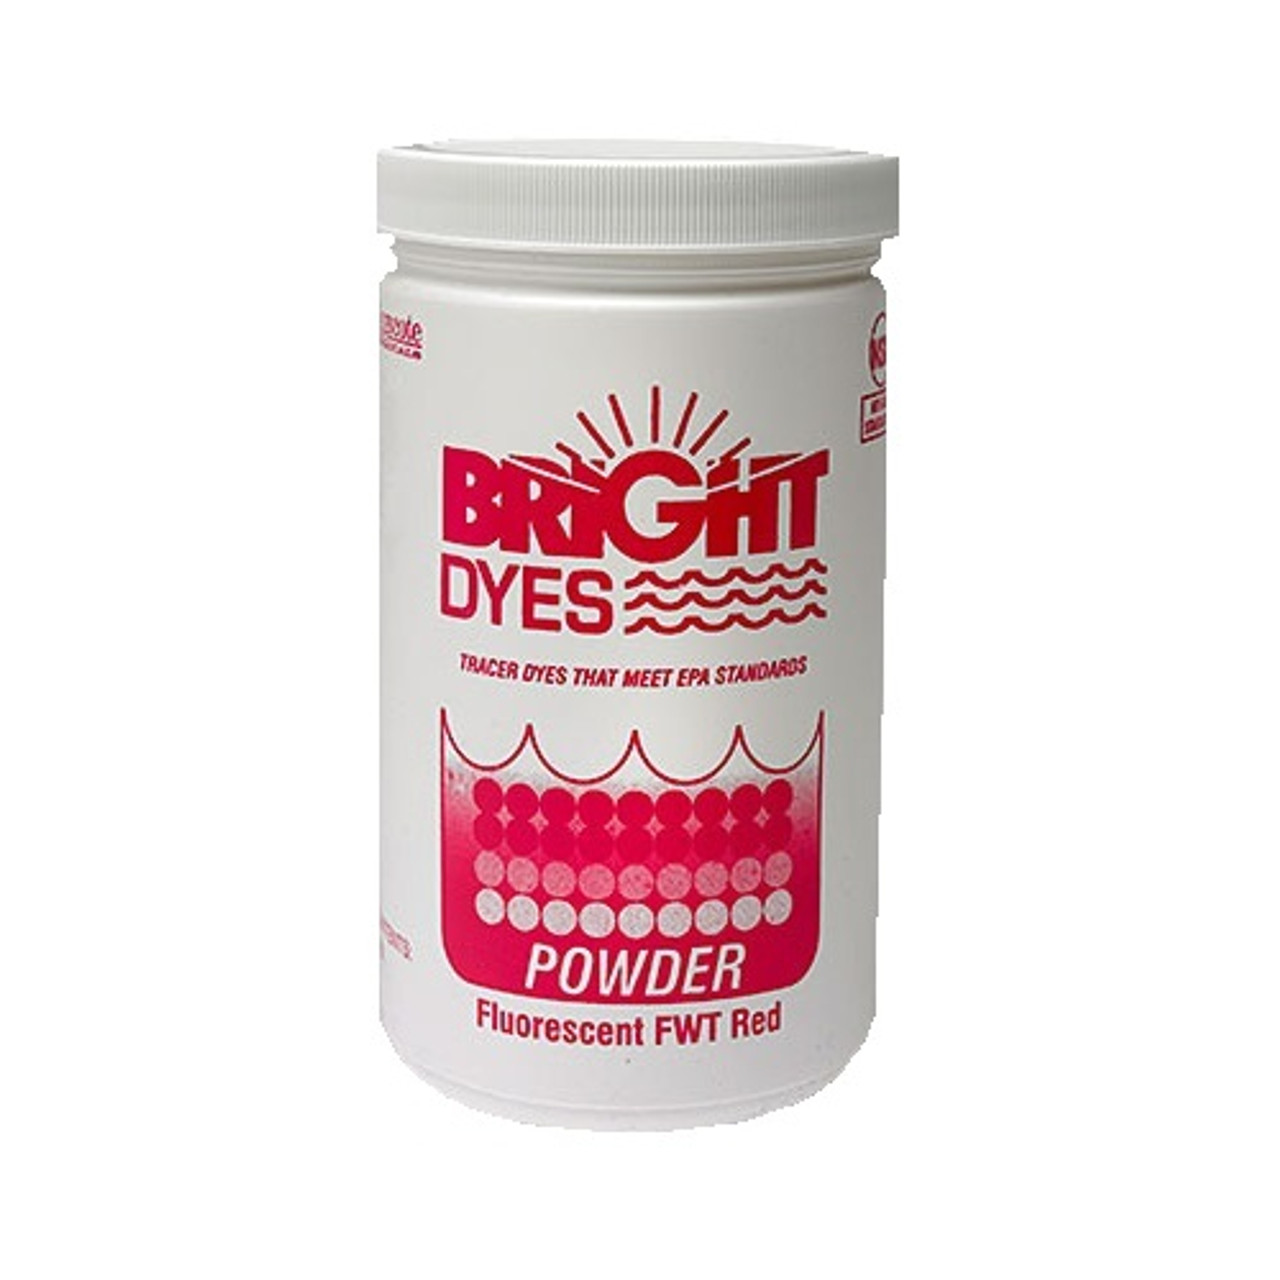 Bright Dyes Fluorescent FWT Red Dye Powder